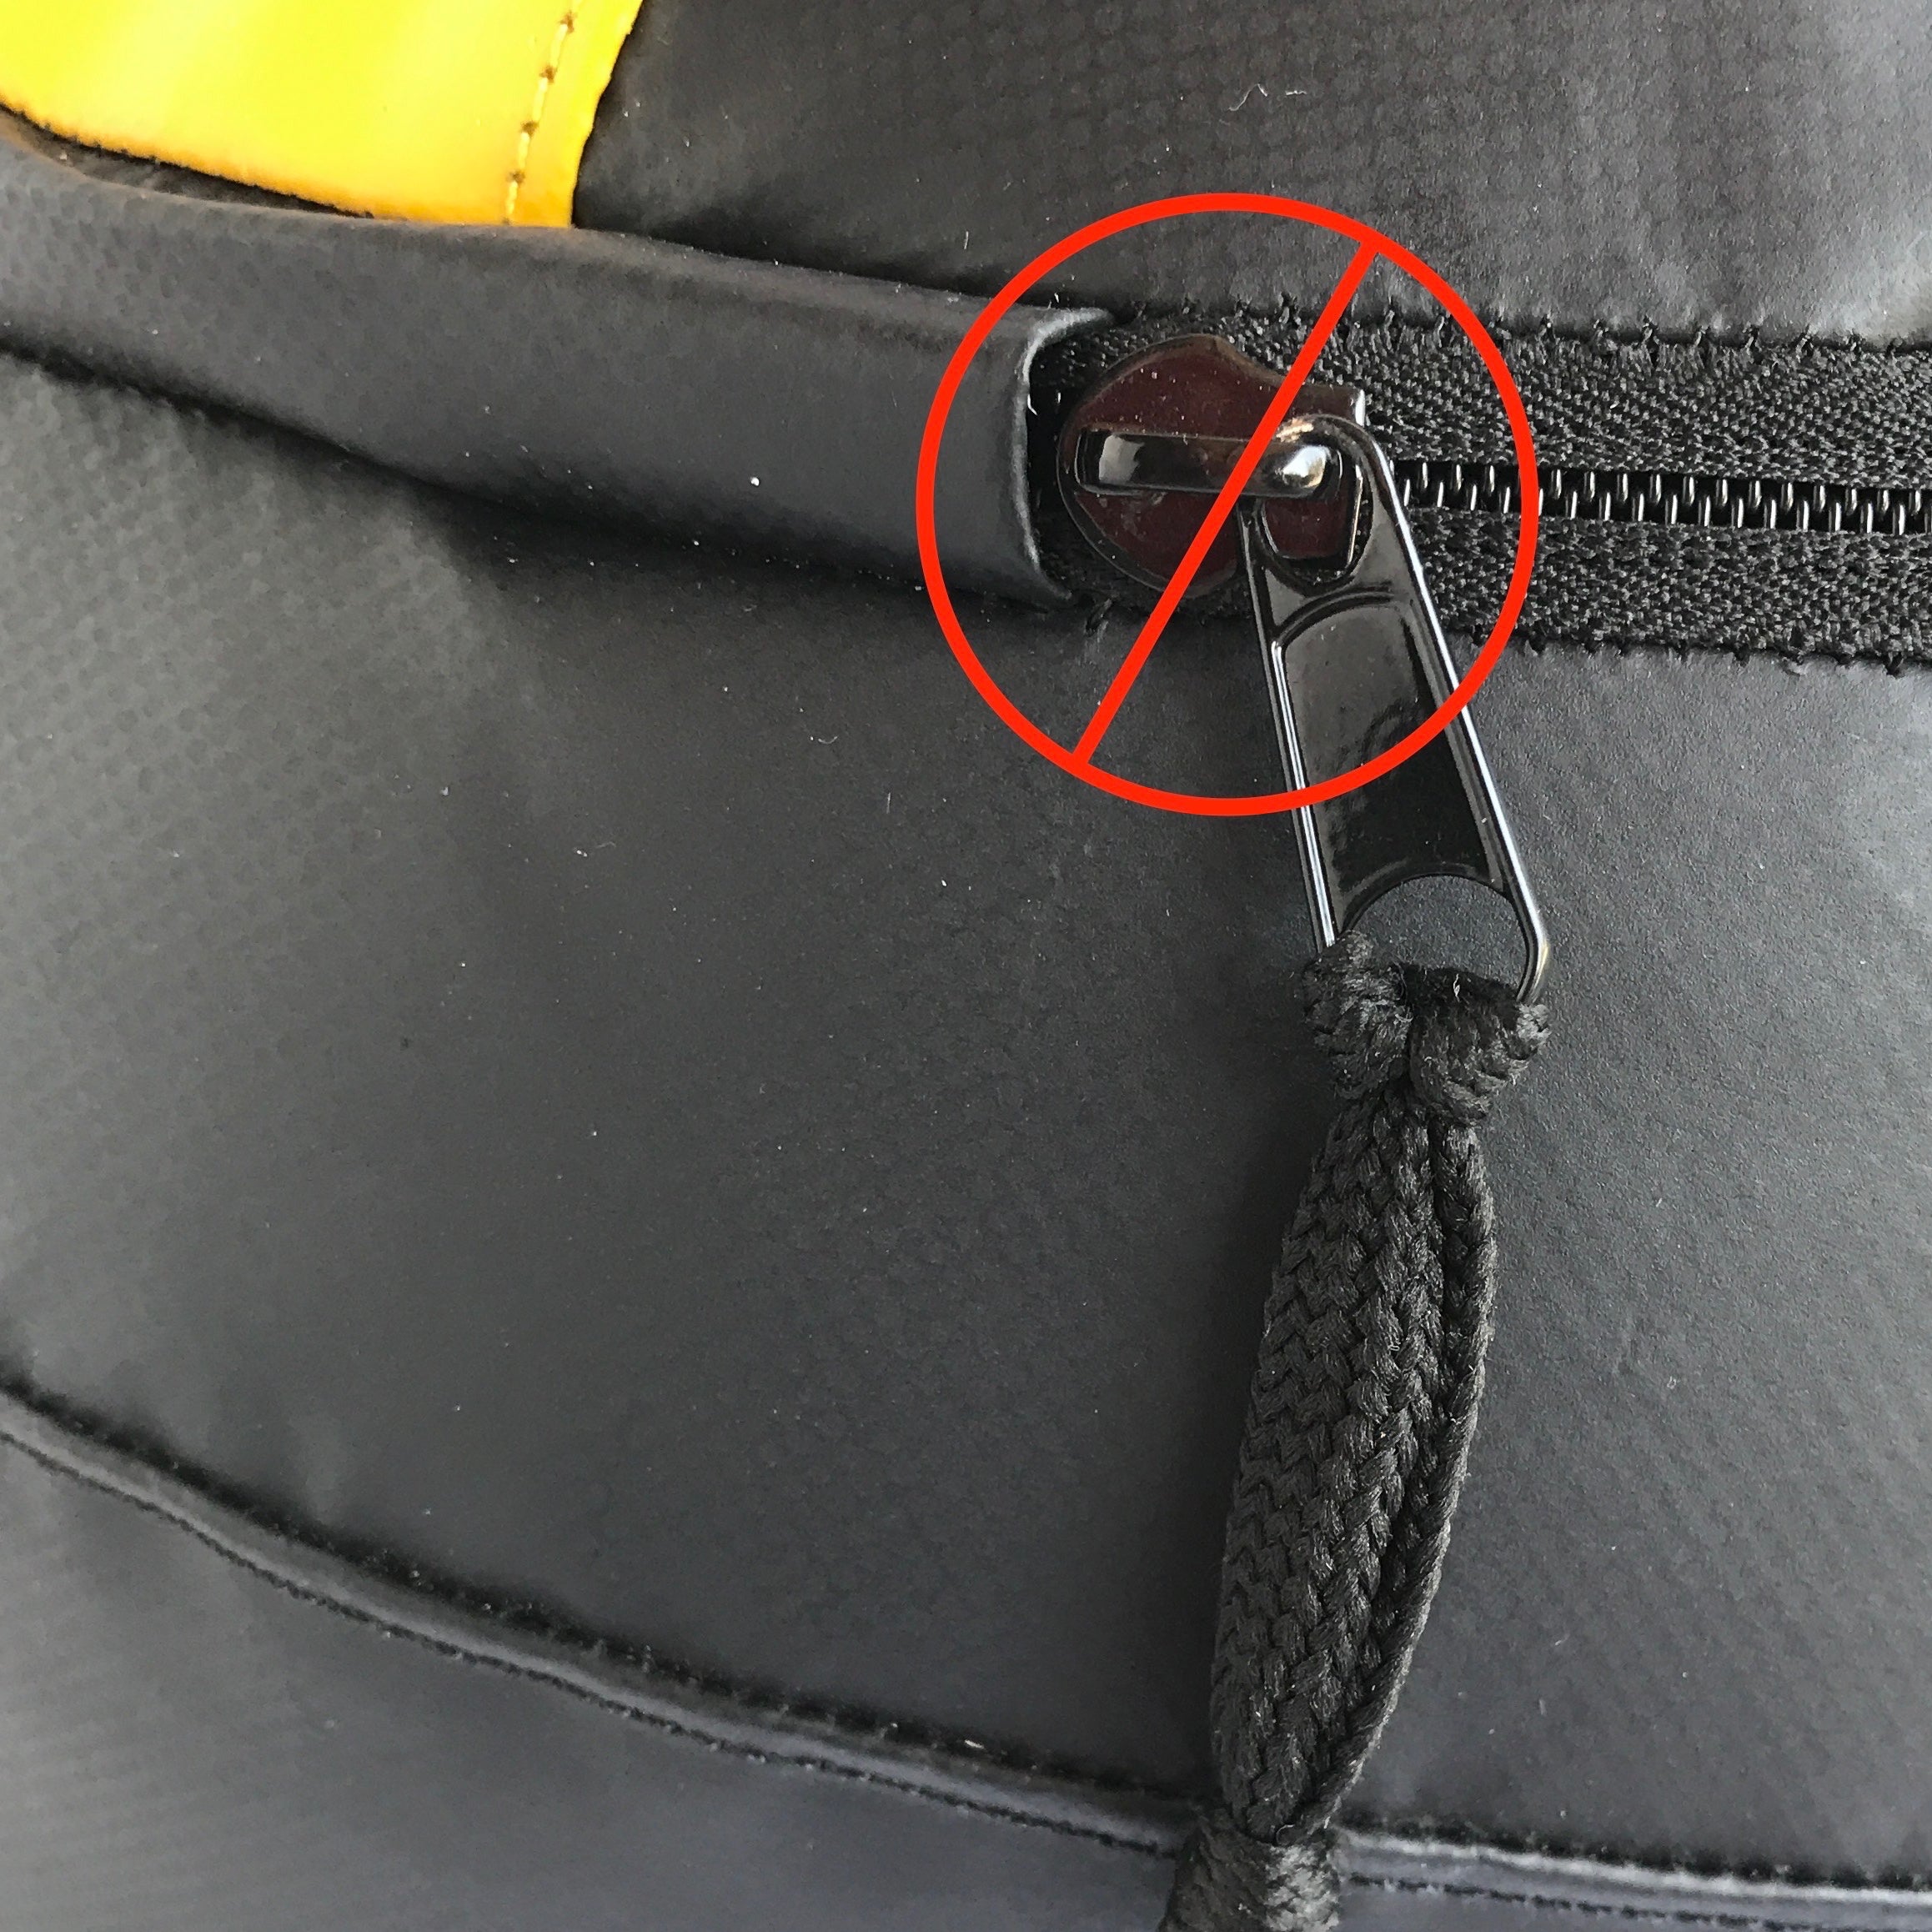 A Variaball® zipped shut but with the zipper pull tab NOT stored away properly